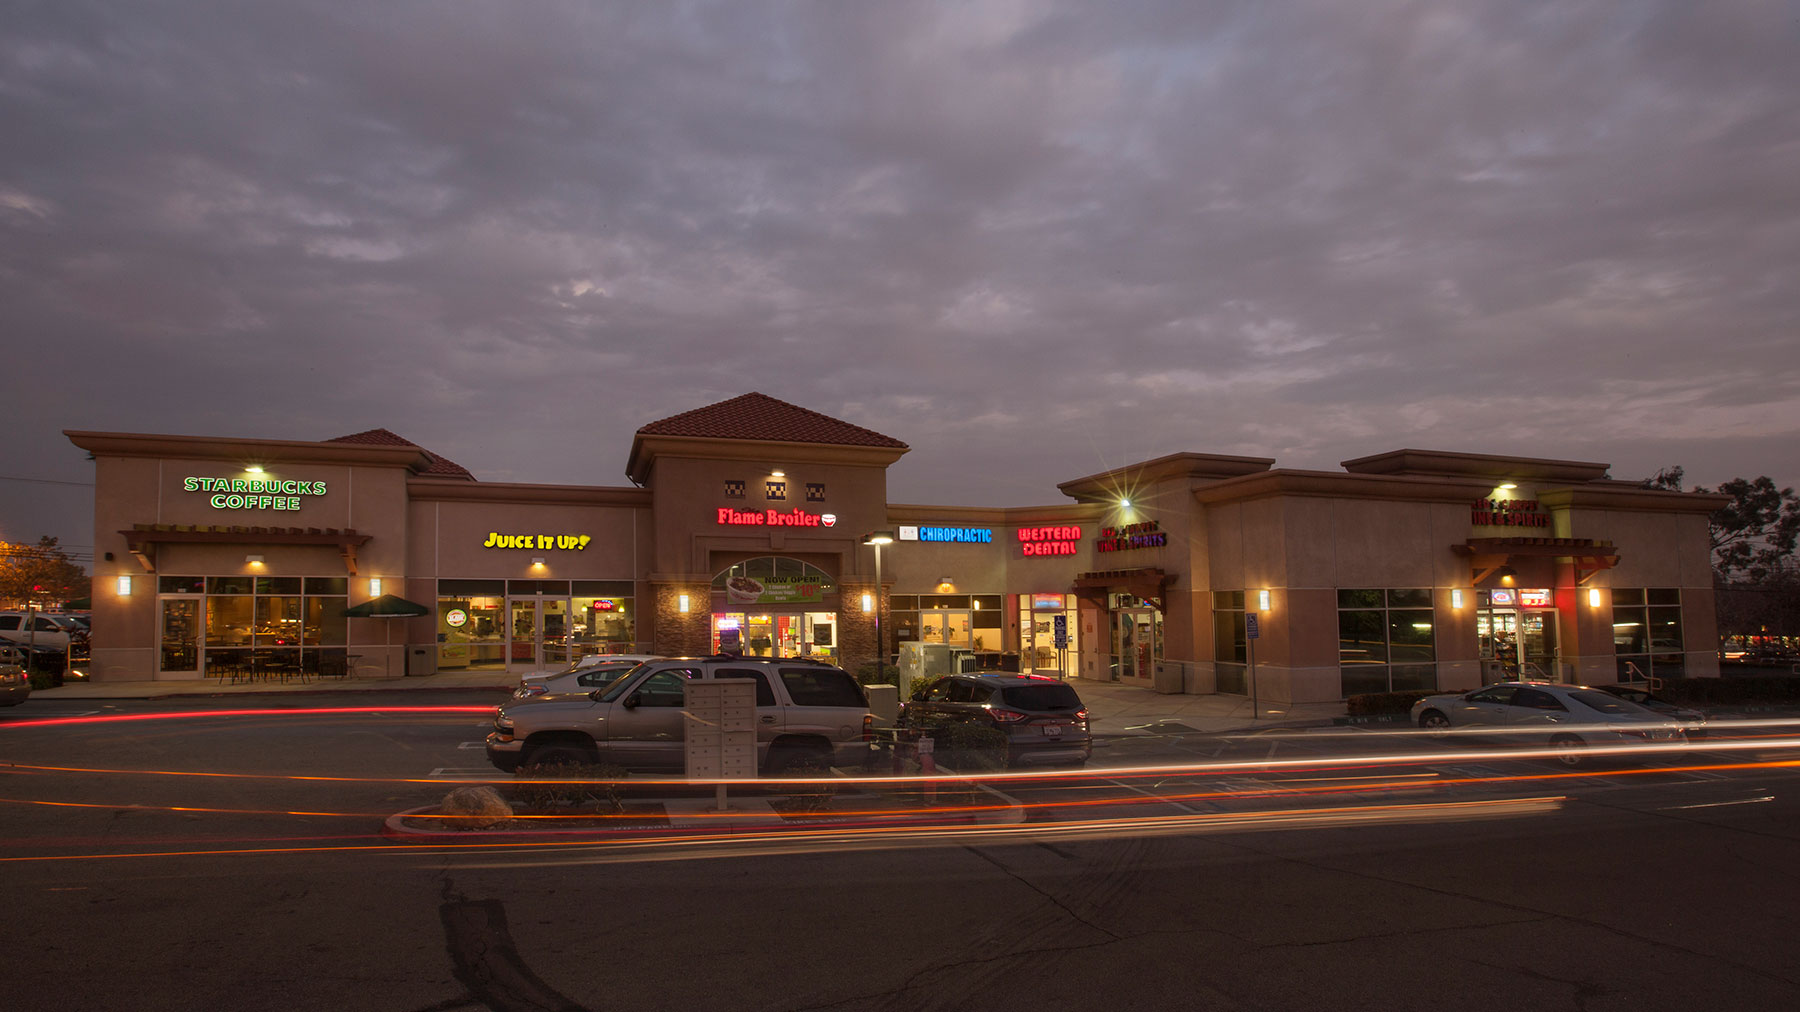 Fit Development Sells Rancho Cucamonga Retail Center for $13.8 Million